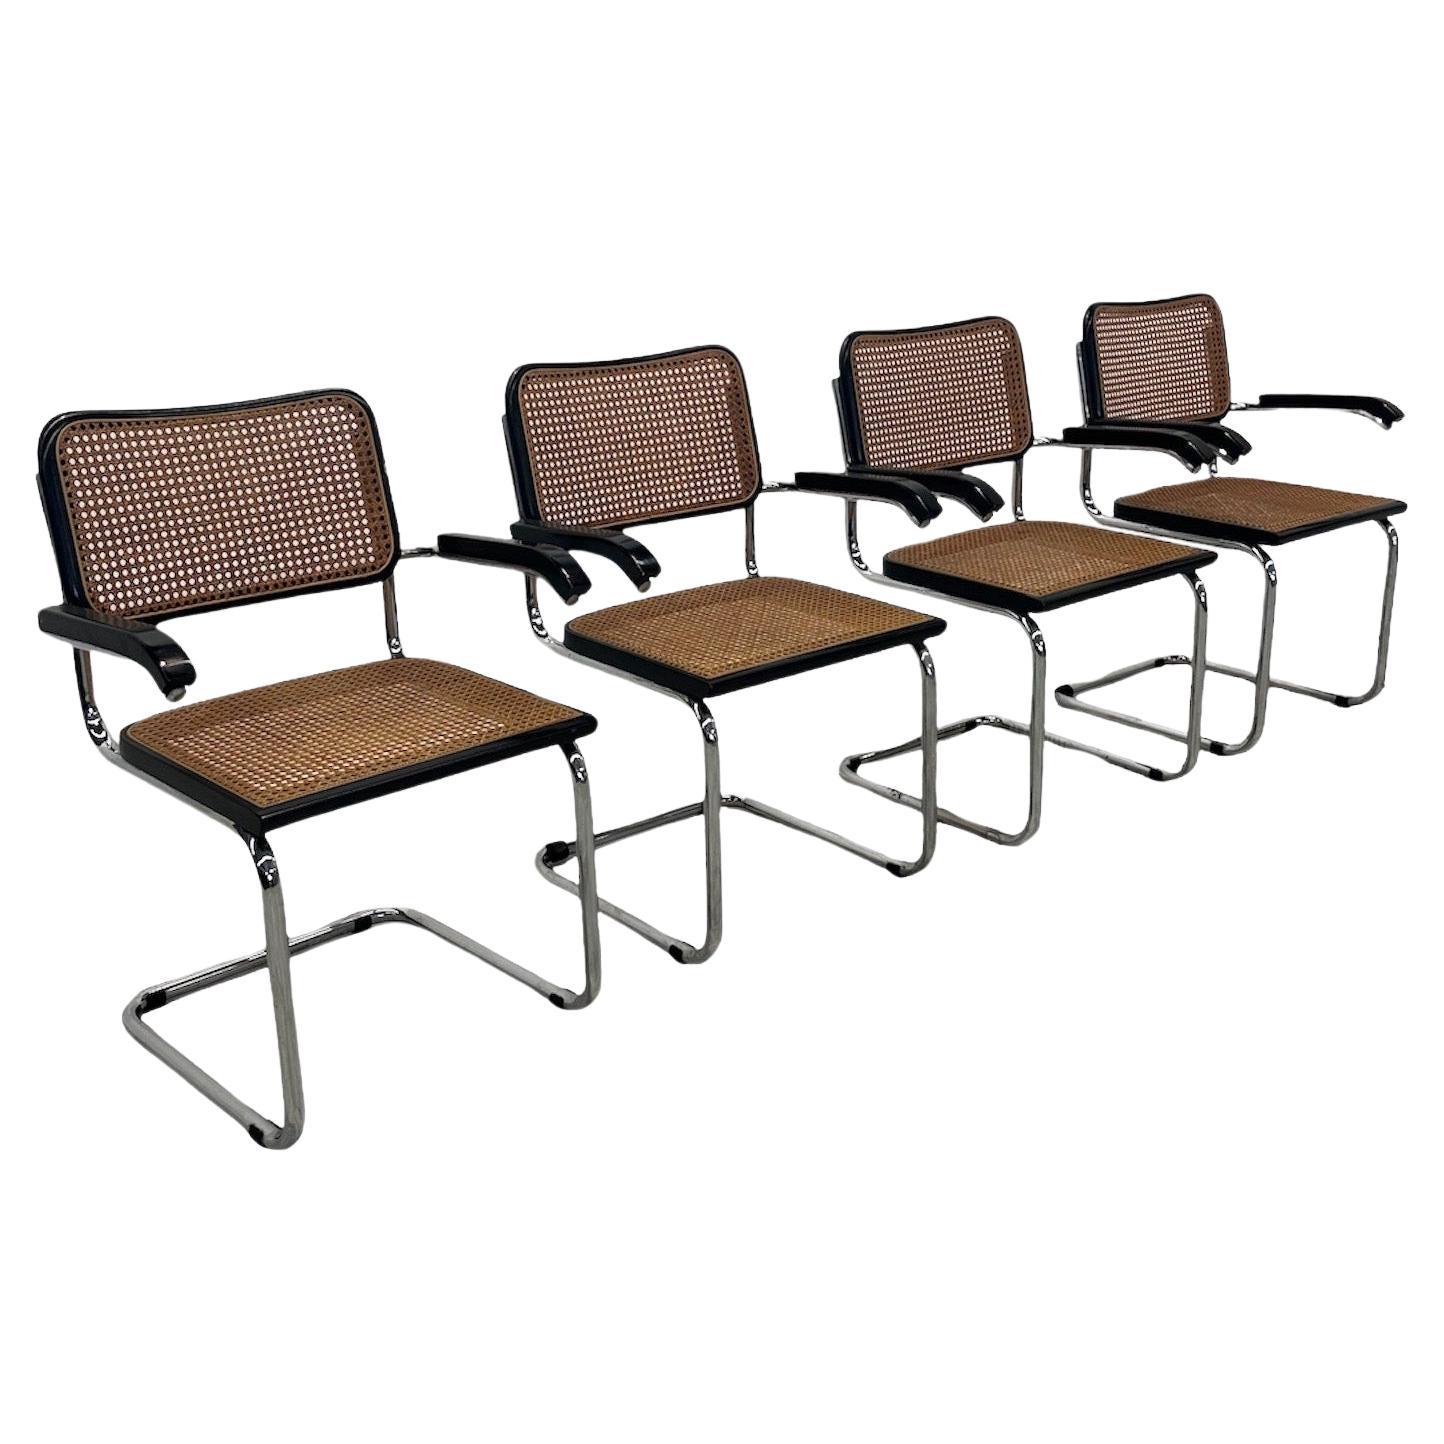 Pair of 4 Marcel Breuer B64 Design Cesca Chairs by Gavina, circa 1960 For Sale